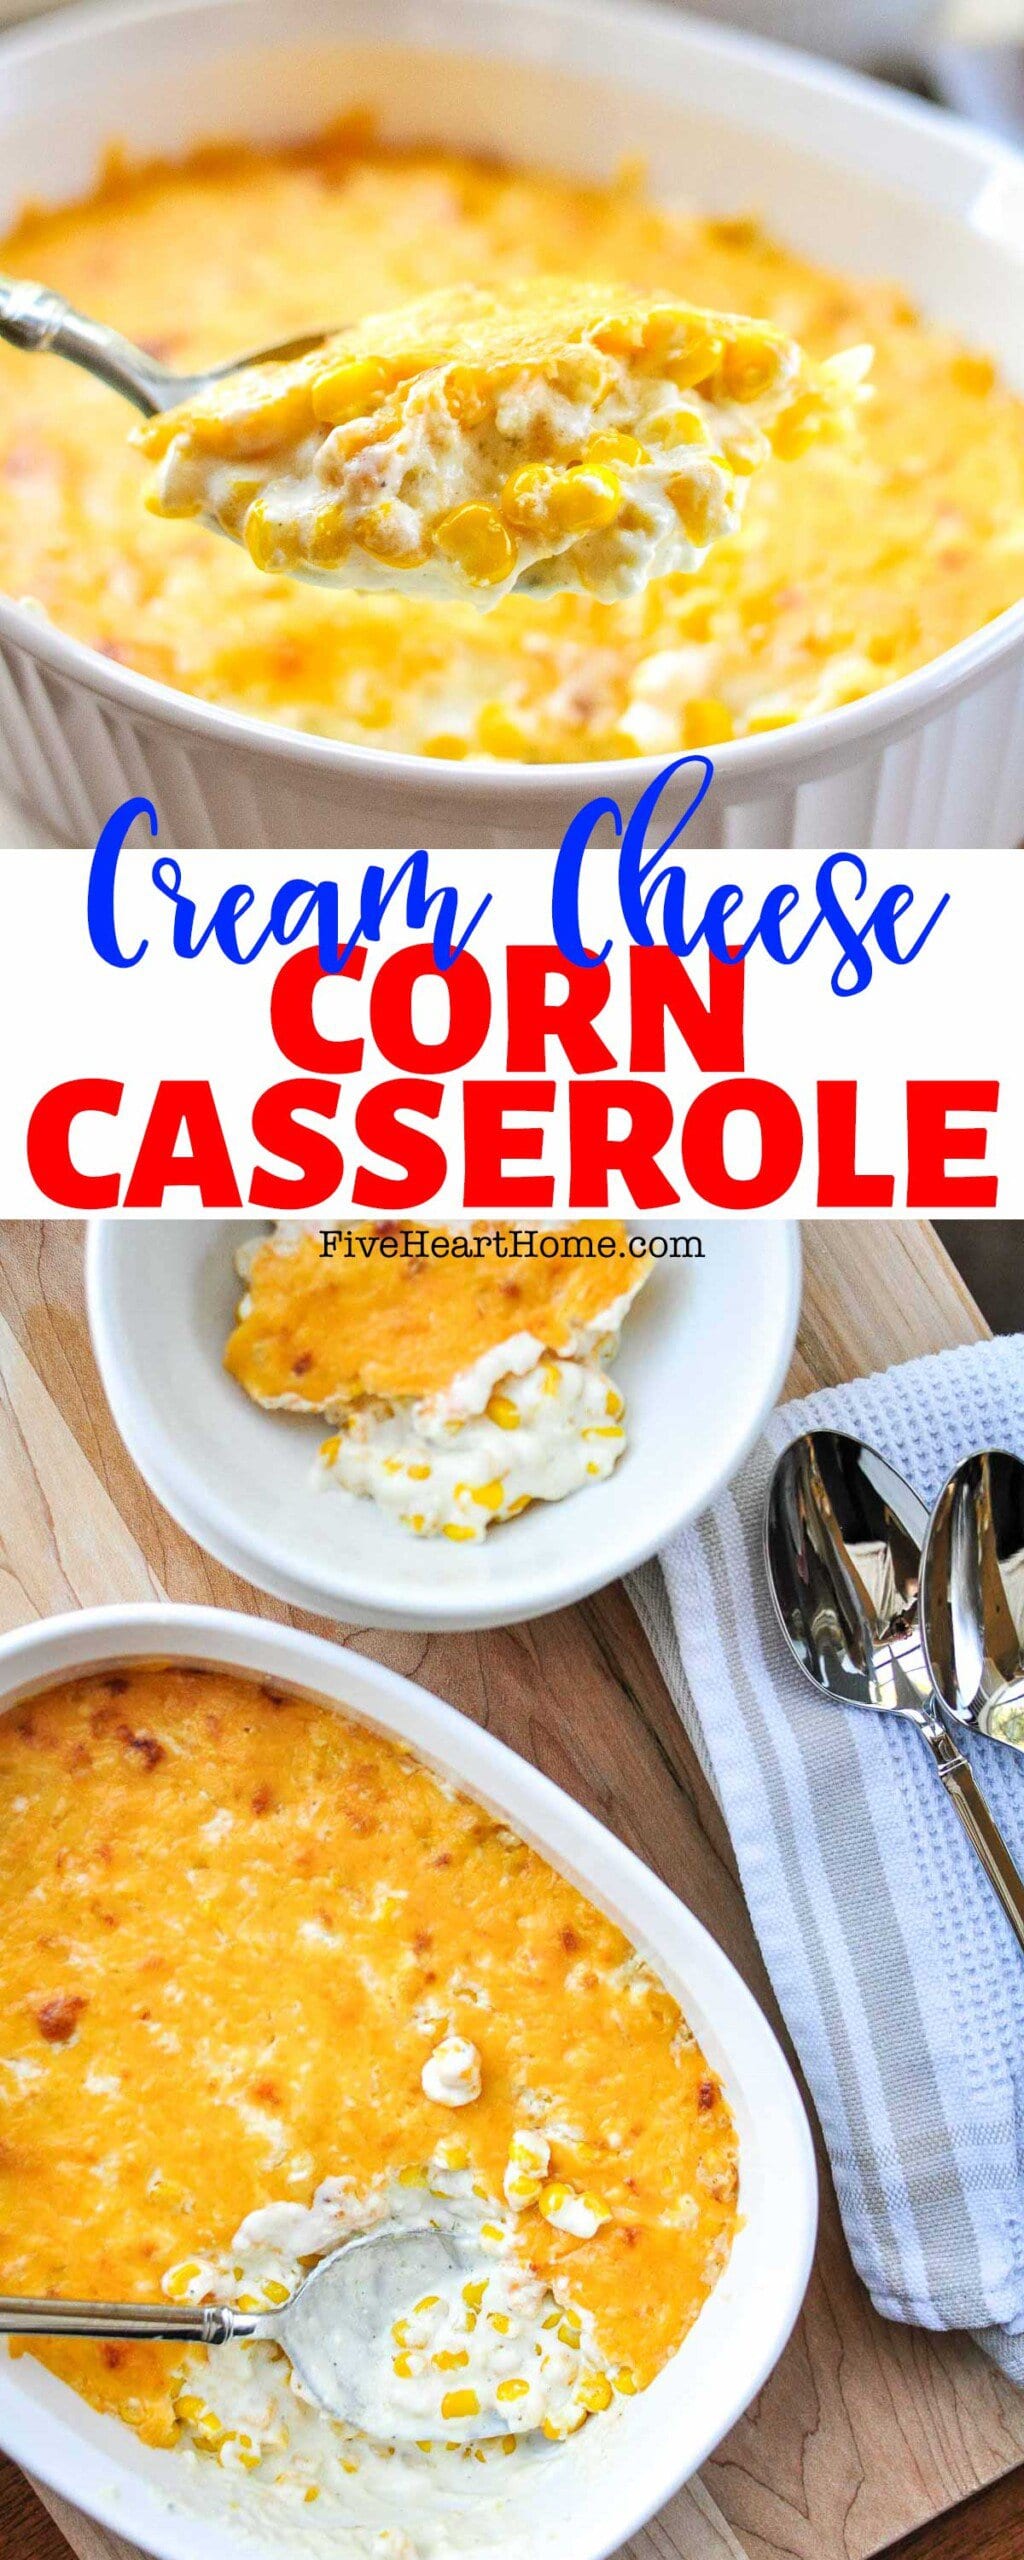 Cream Cheese Corn Casserole ~ a decadent, comforting side dish featuring sweet corn mixed with cream cheese, sharp cheddar, and (optional) diced jalapeños. It’s the only corn casserole recipe you’ll need! | FiveHeartHome.com via @fivehearthome